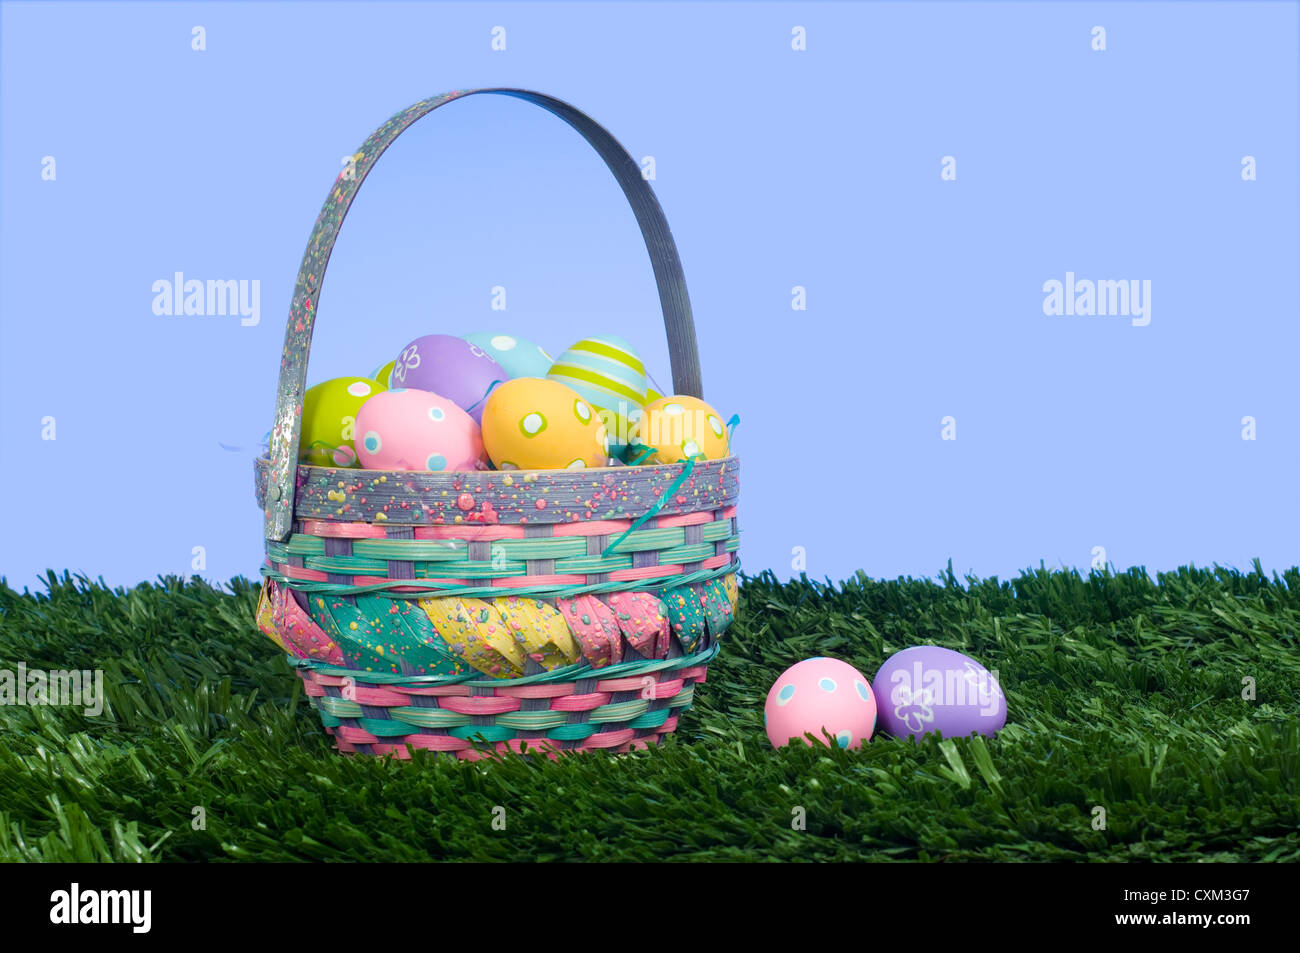 Brightly colored Easter eggs in a basket on grass with a blue sky background Stock Photo